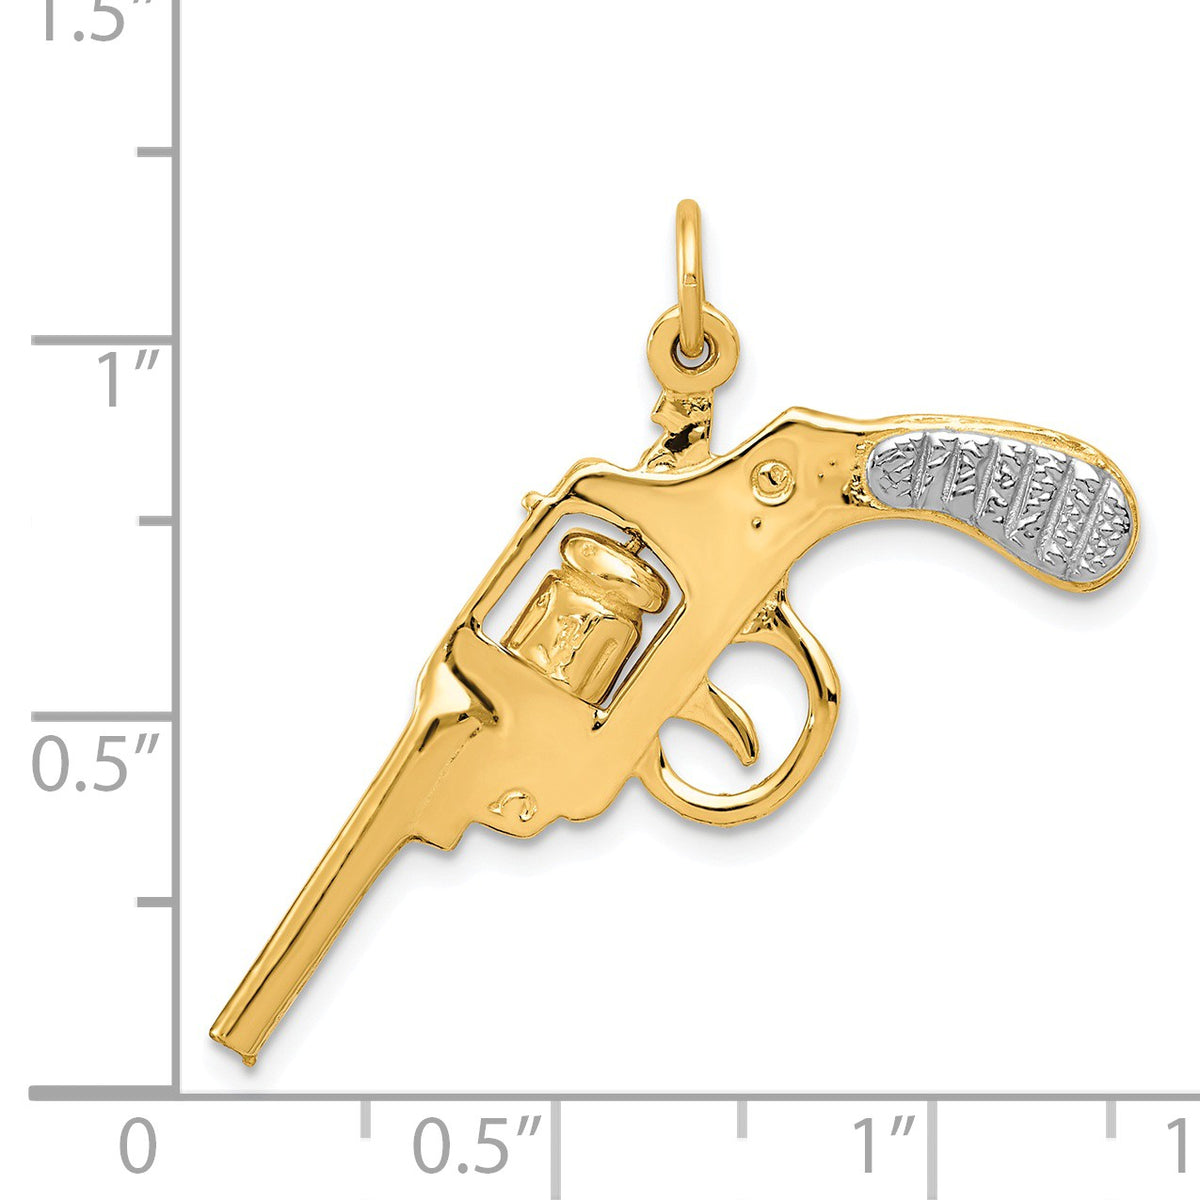 Alternate view of the 14k Yellow Gold and White Rhodium Two Tone Moveable Revolver Charm by The Black Bow Jewelry Co.